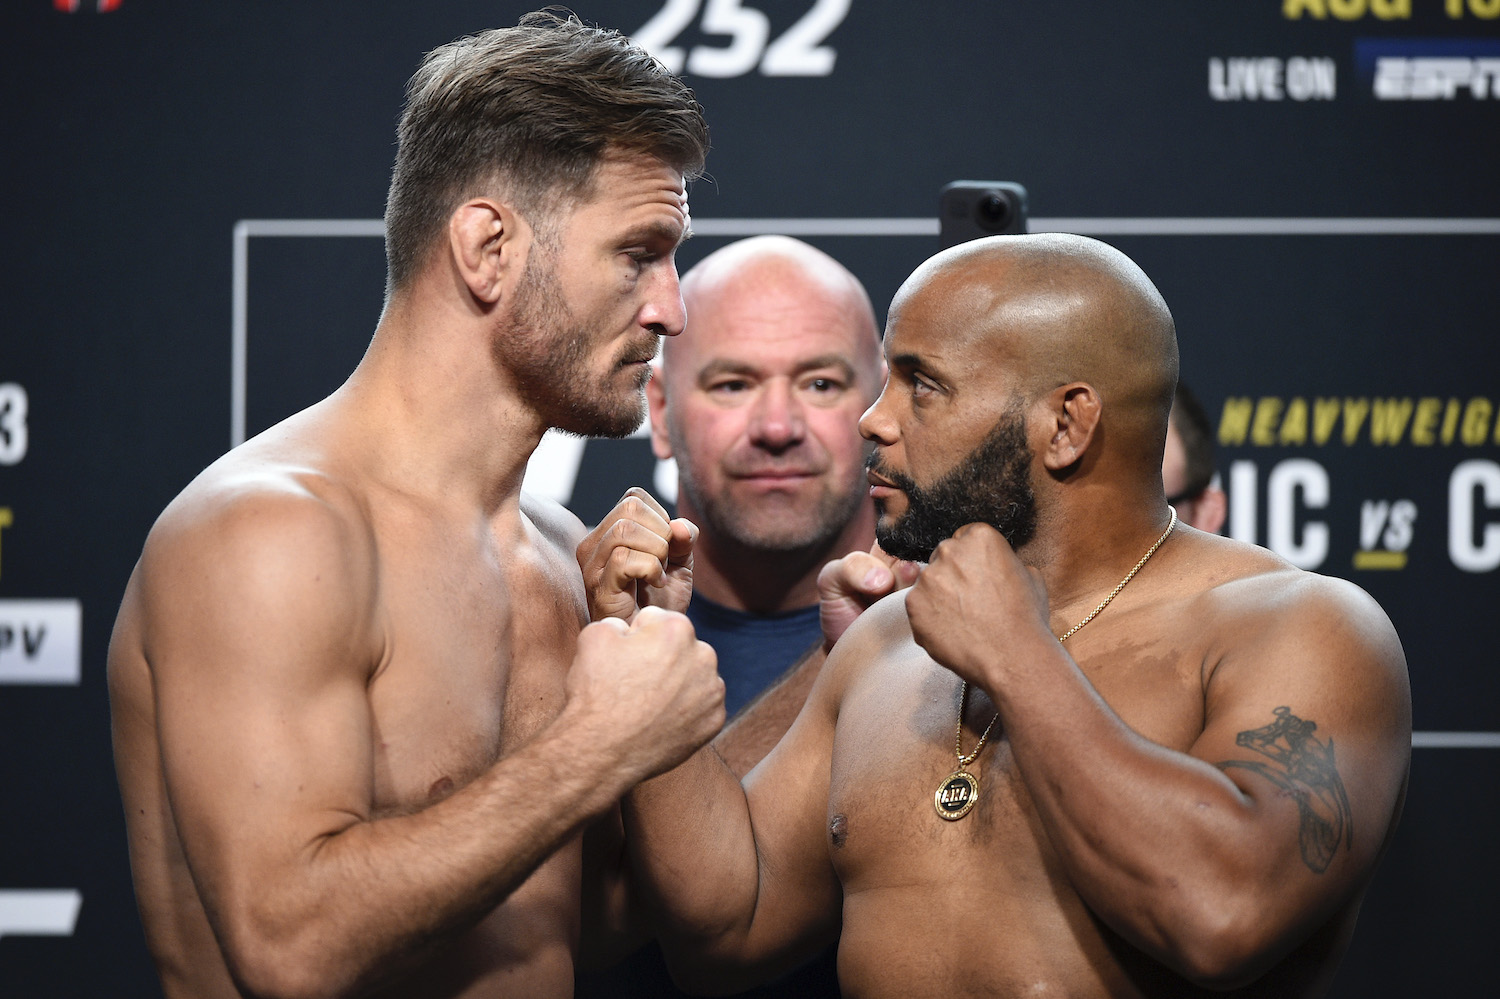 Daniel Cormier vs. Stipe Miocic 3 in UFC 252 and Fight for Heavyweight Championship